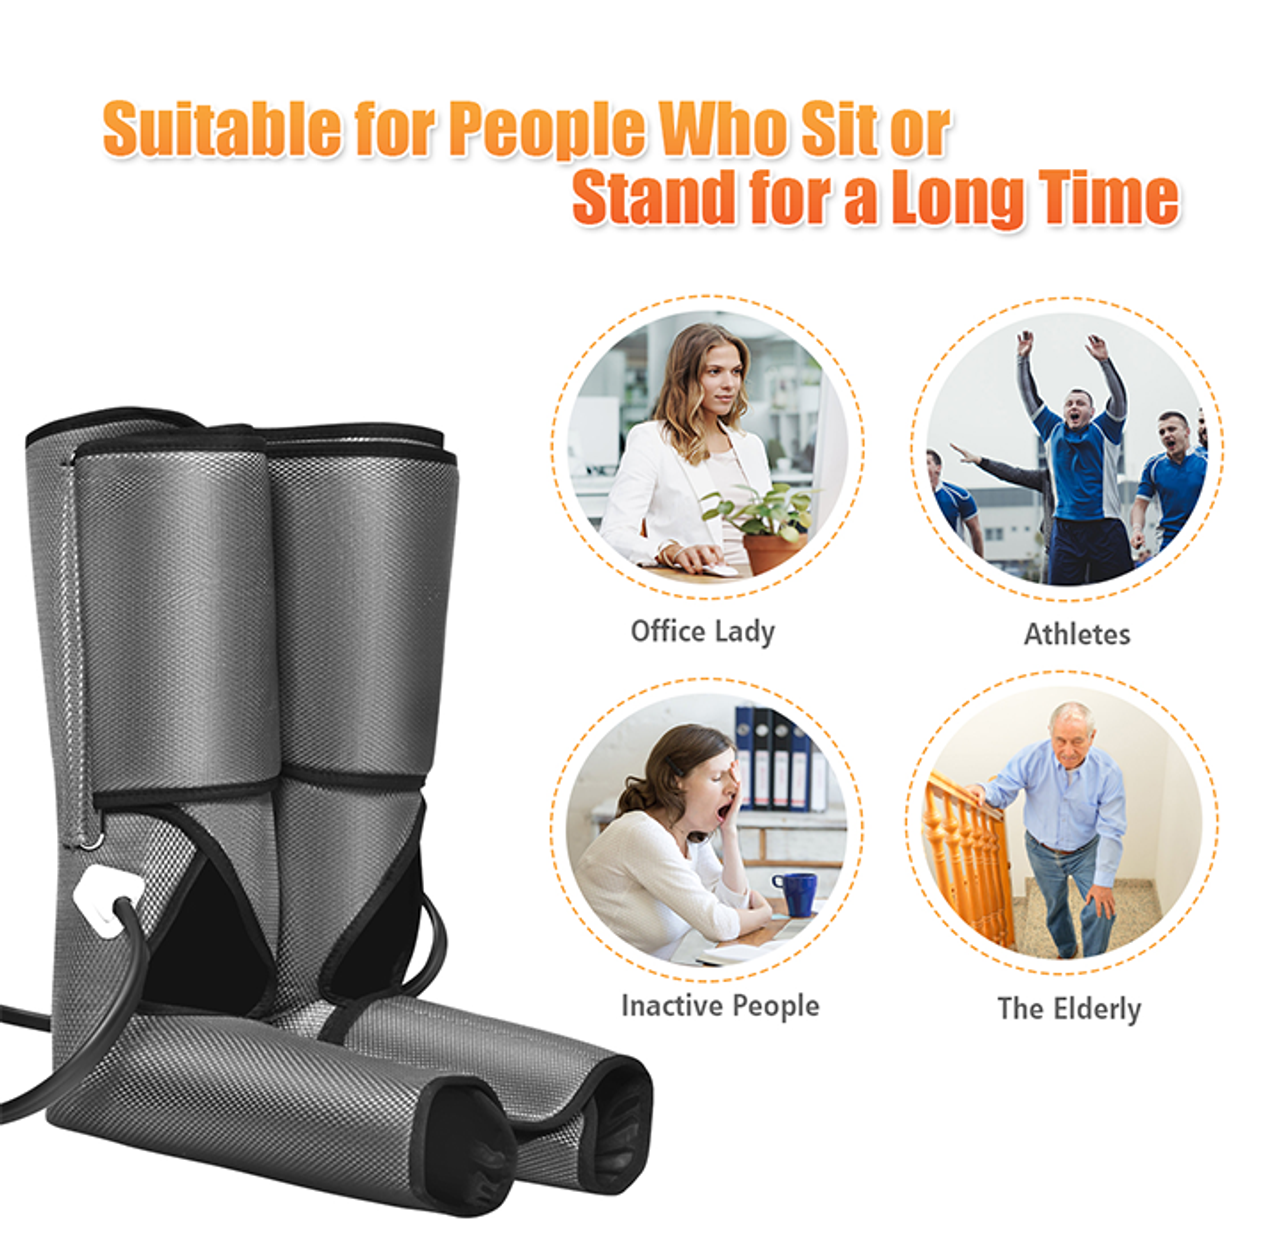 Air Compression Circulation and Relaxation Leg Massager product image